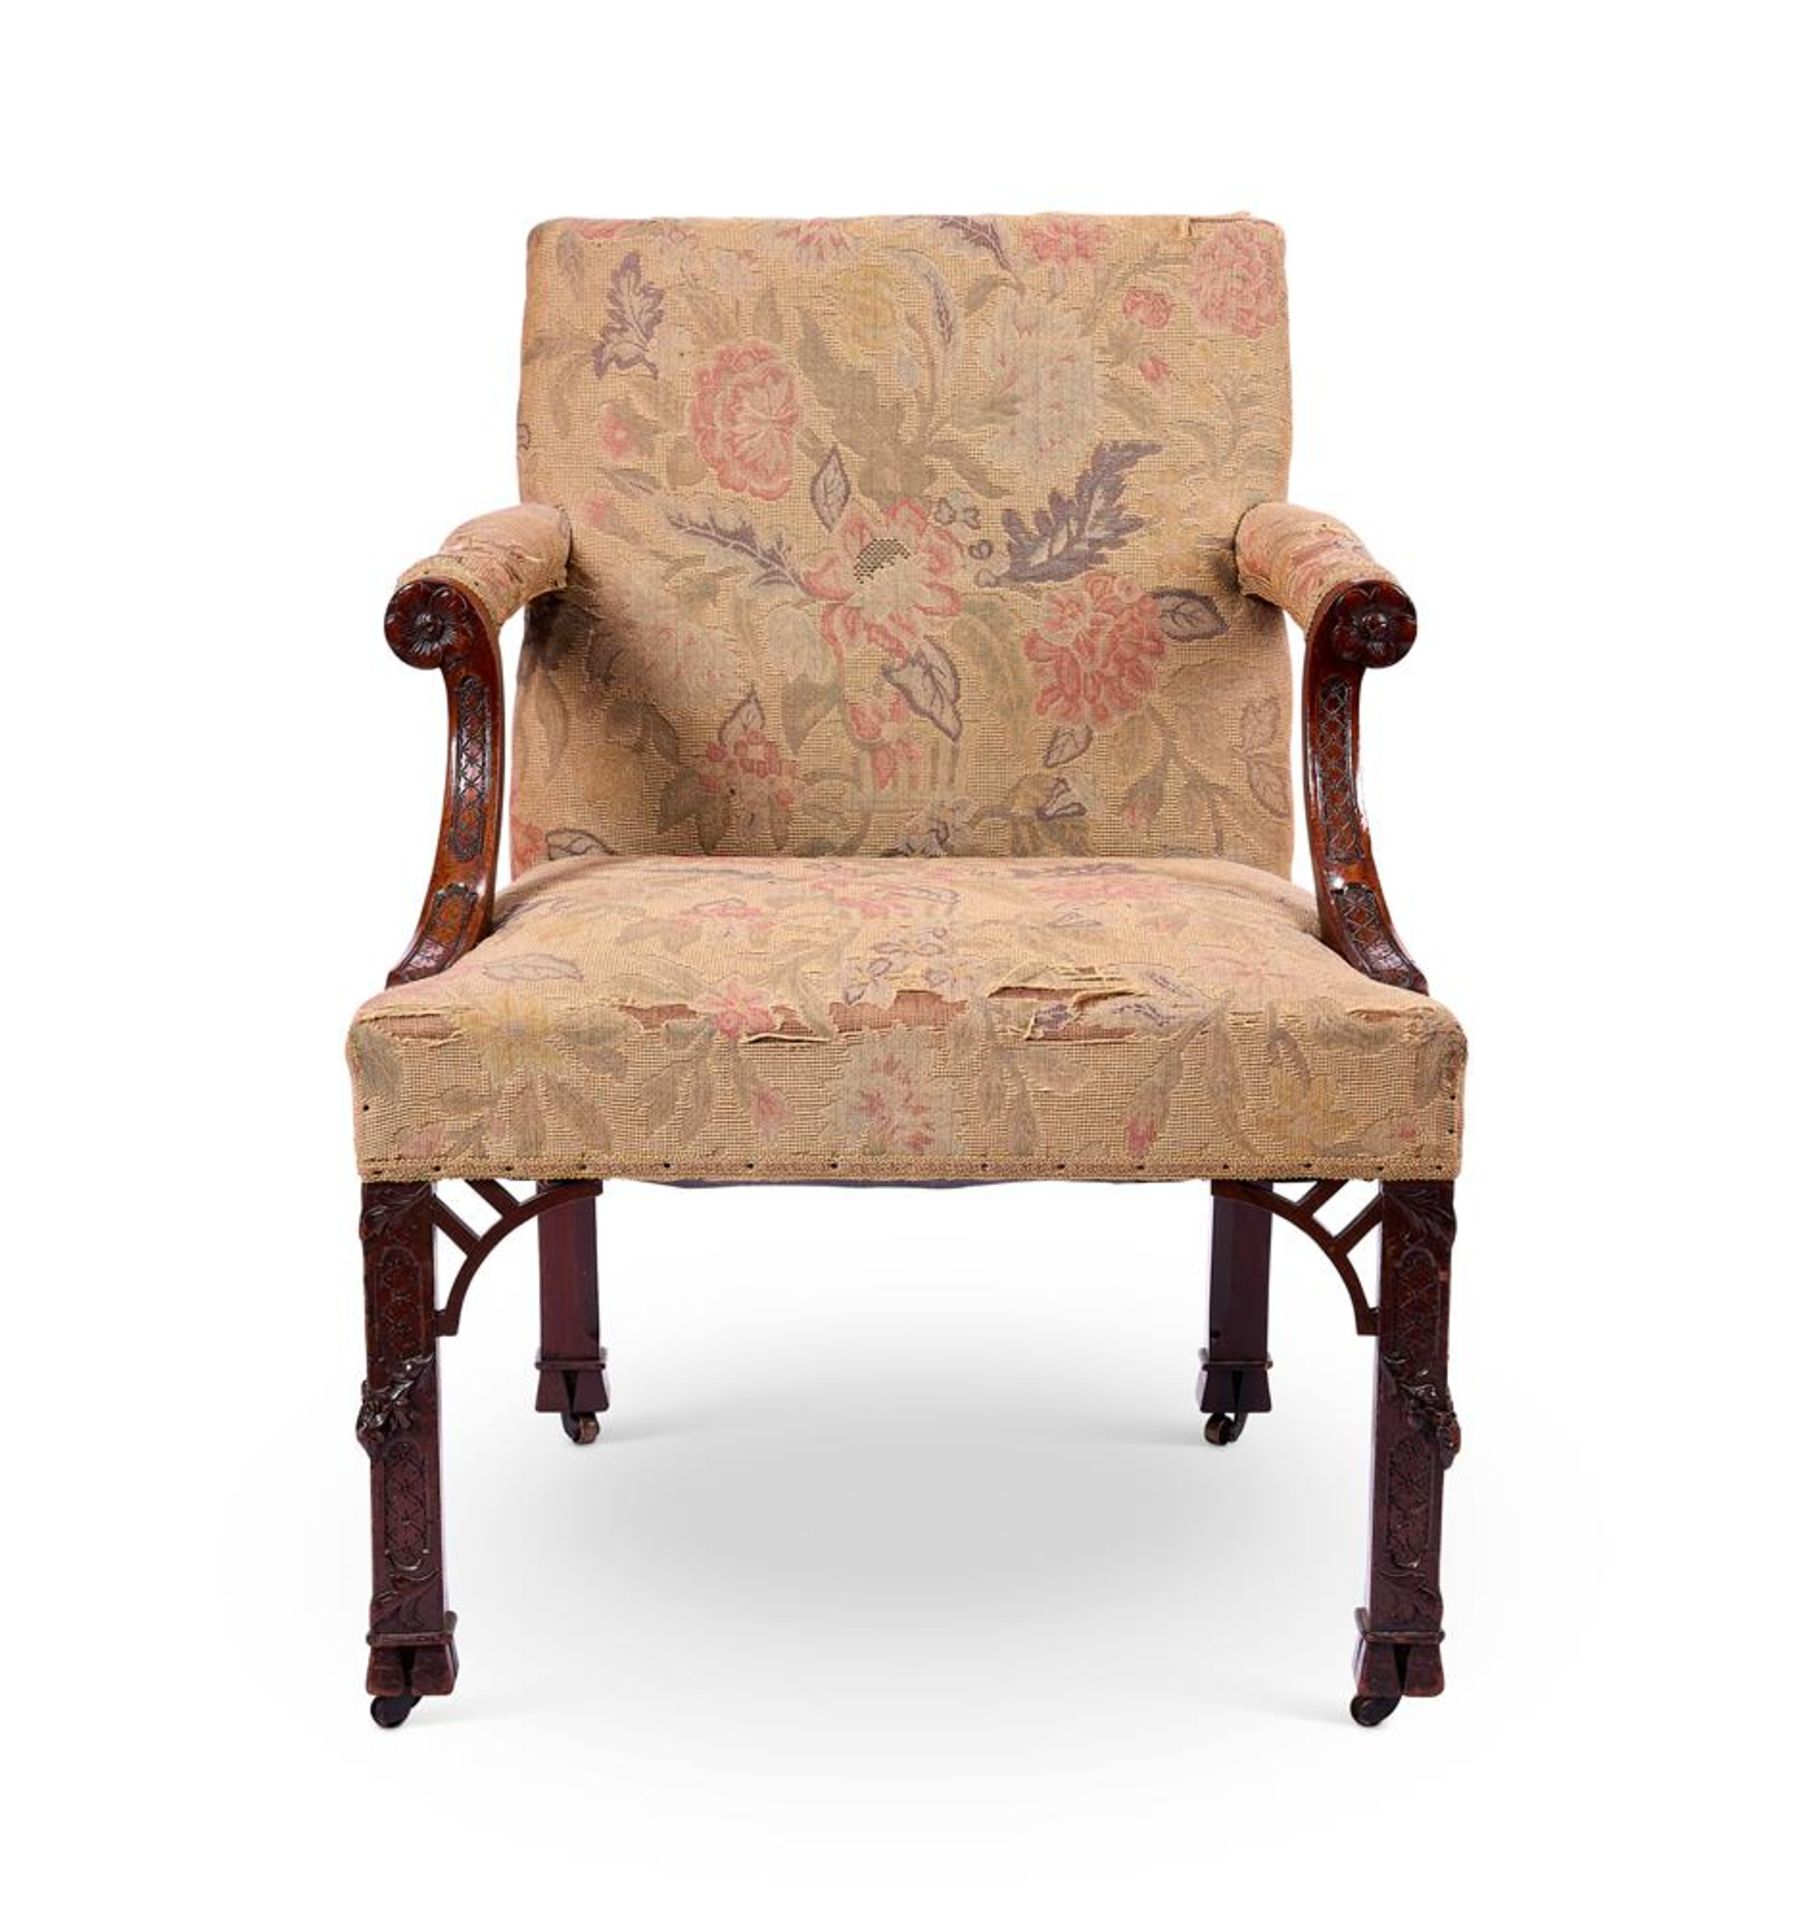 A PAIR OF GEORGE III STYLE MAHOGANY LIBRARY ARMCHAIRS - Image 2 of 6